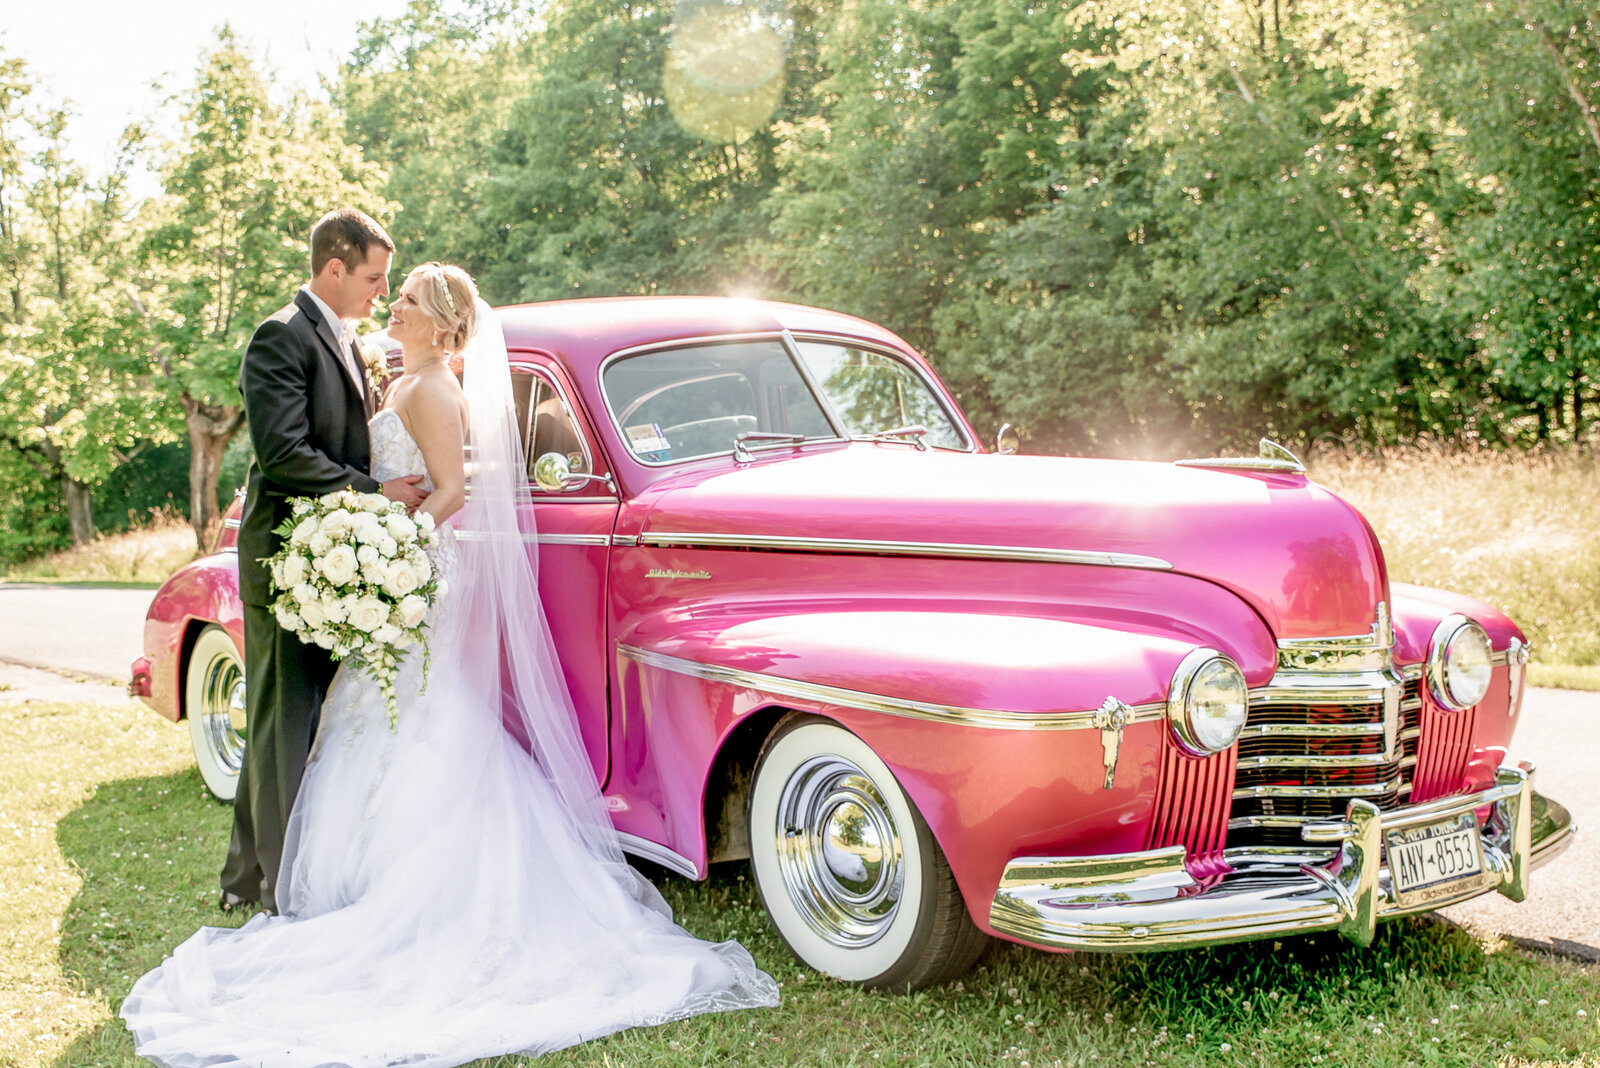 Bride and groom pose in front of a pink classic car